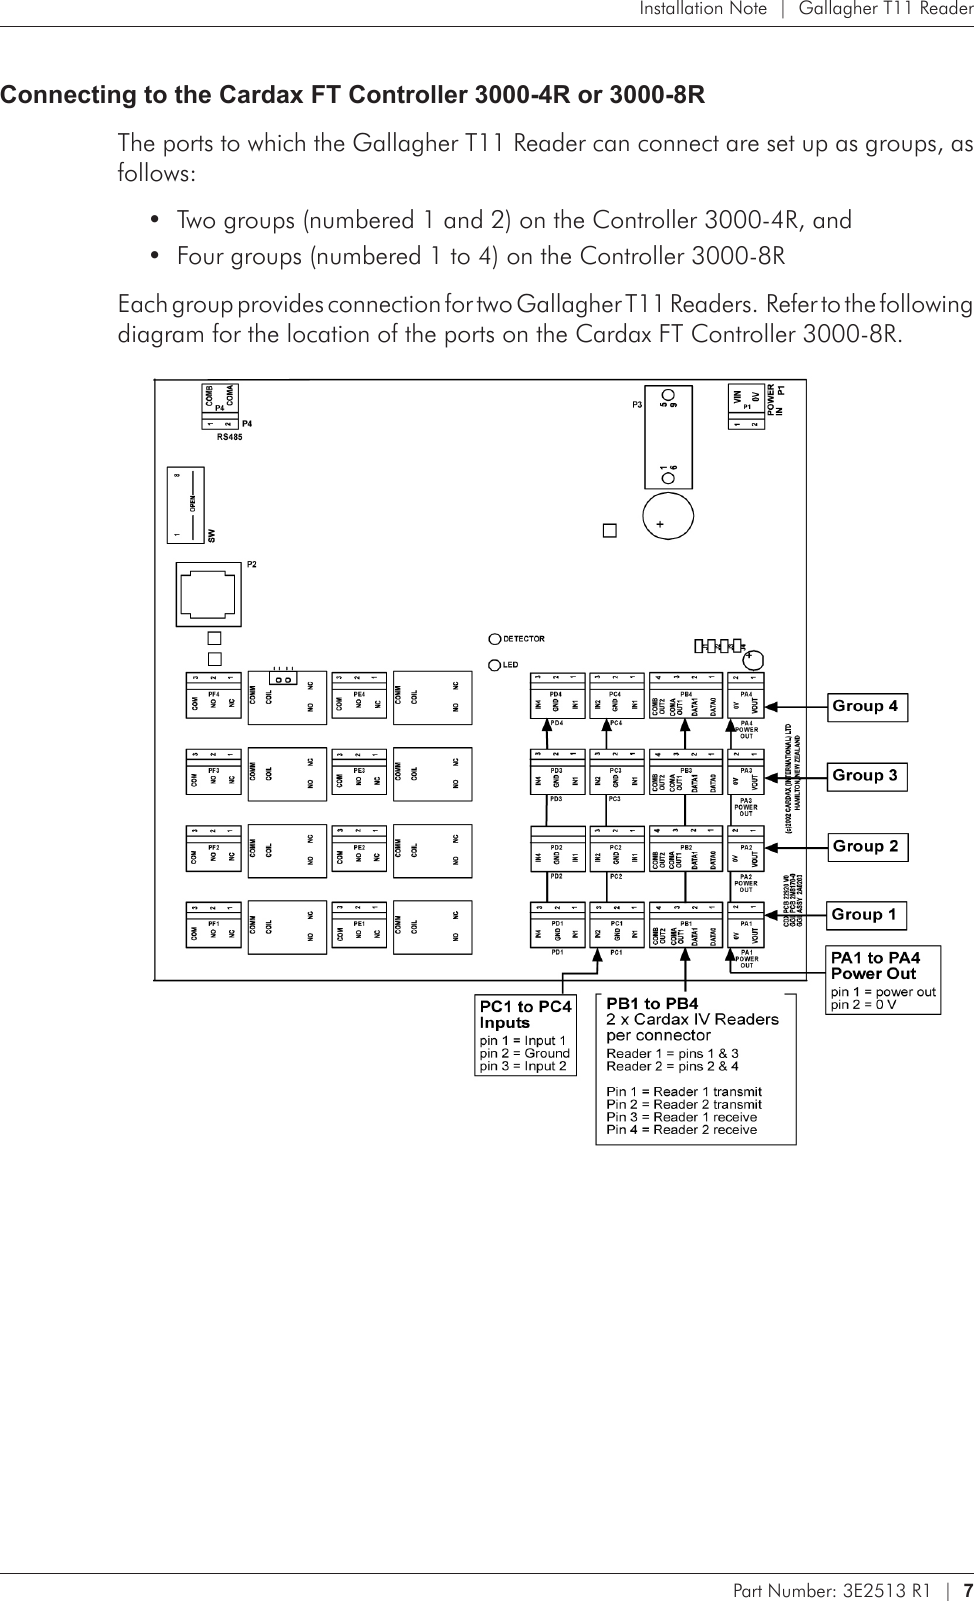 Part Number: 3E2513 R1  |  7   Installation Note  |  Gallagher T11 ReaderConnecting to the Cardax FT Controller 3000-4R or 3000-8RThe ports to which the Gallagher T11 Reader can connect are set up as groups, as follows:Two groups (numbered 1 and 2) on the Controller 3000-4R, and•Four groups (numbered 1 to 4) on the Controller 3000-8R•Each group provides connection for two Gallagher T11 Readers.  Refer to the following diagram for the location of the ports on the Cardax FT Controller 3000-8R. 